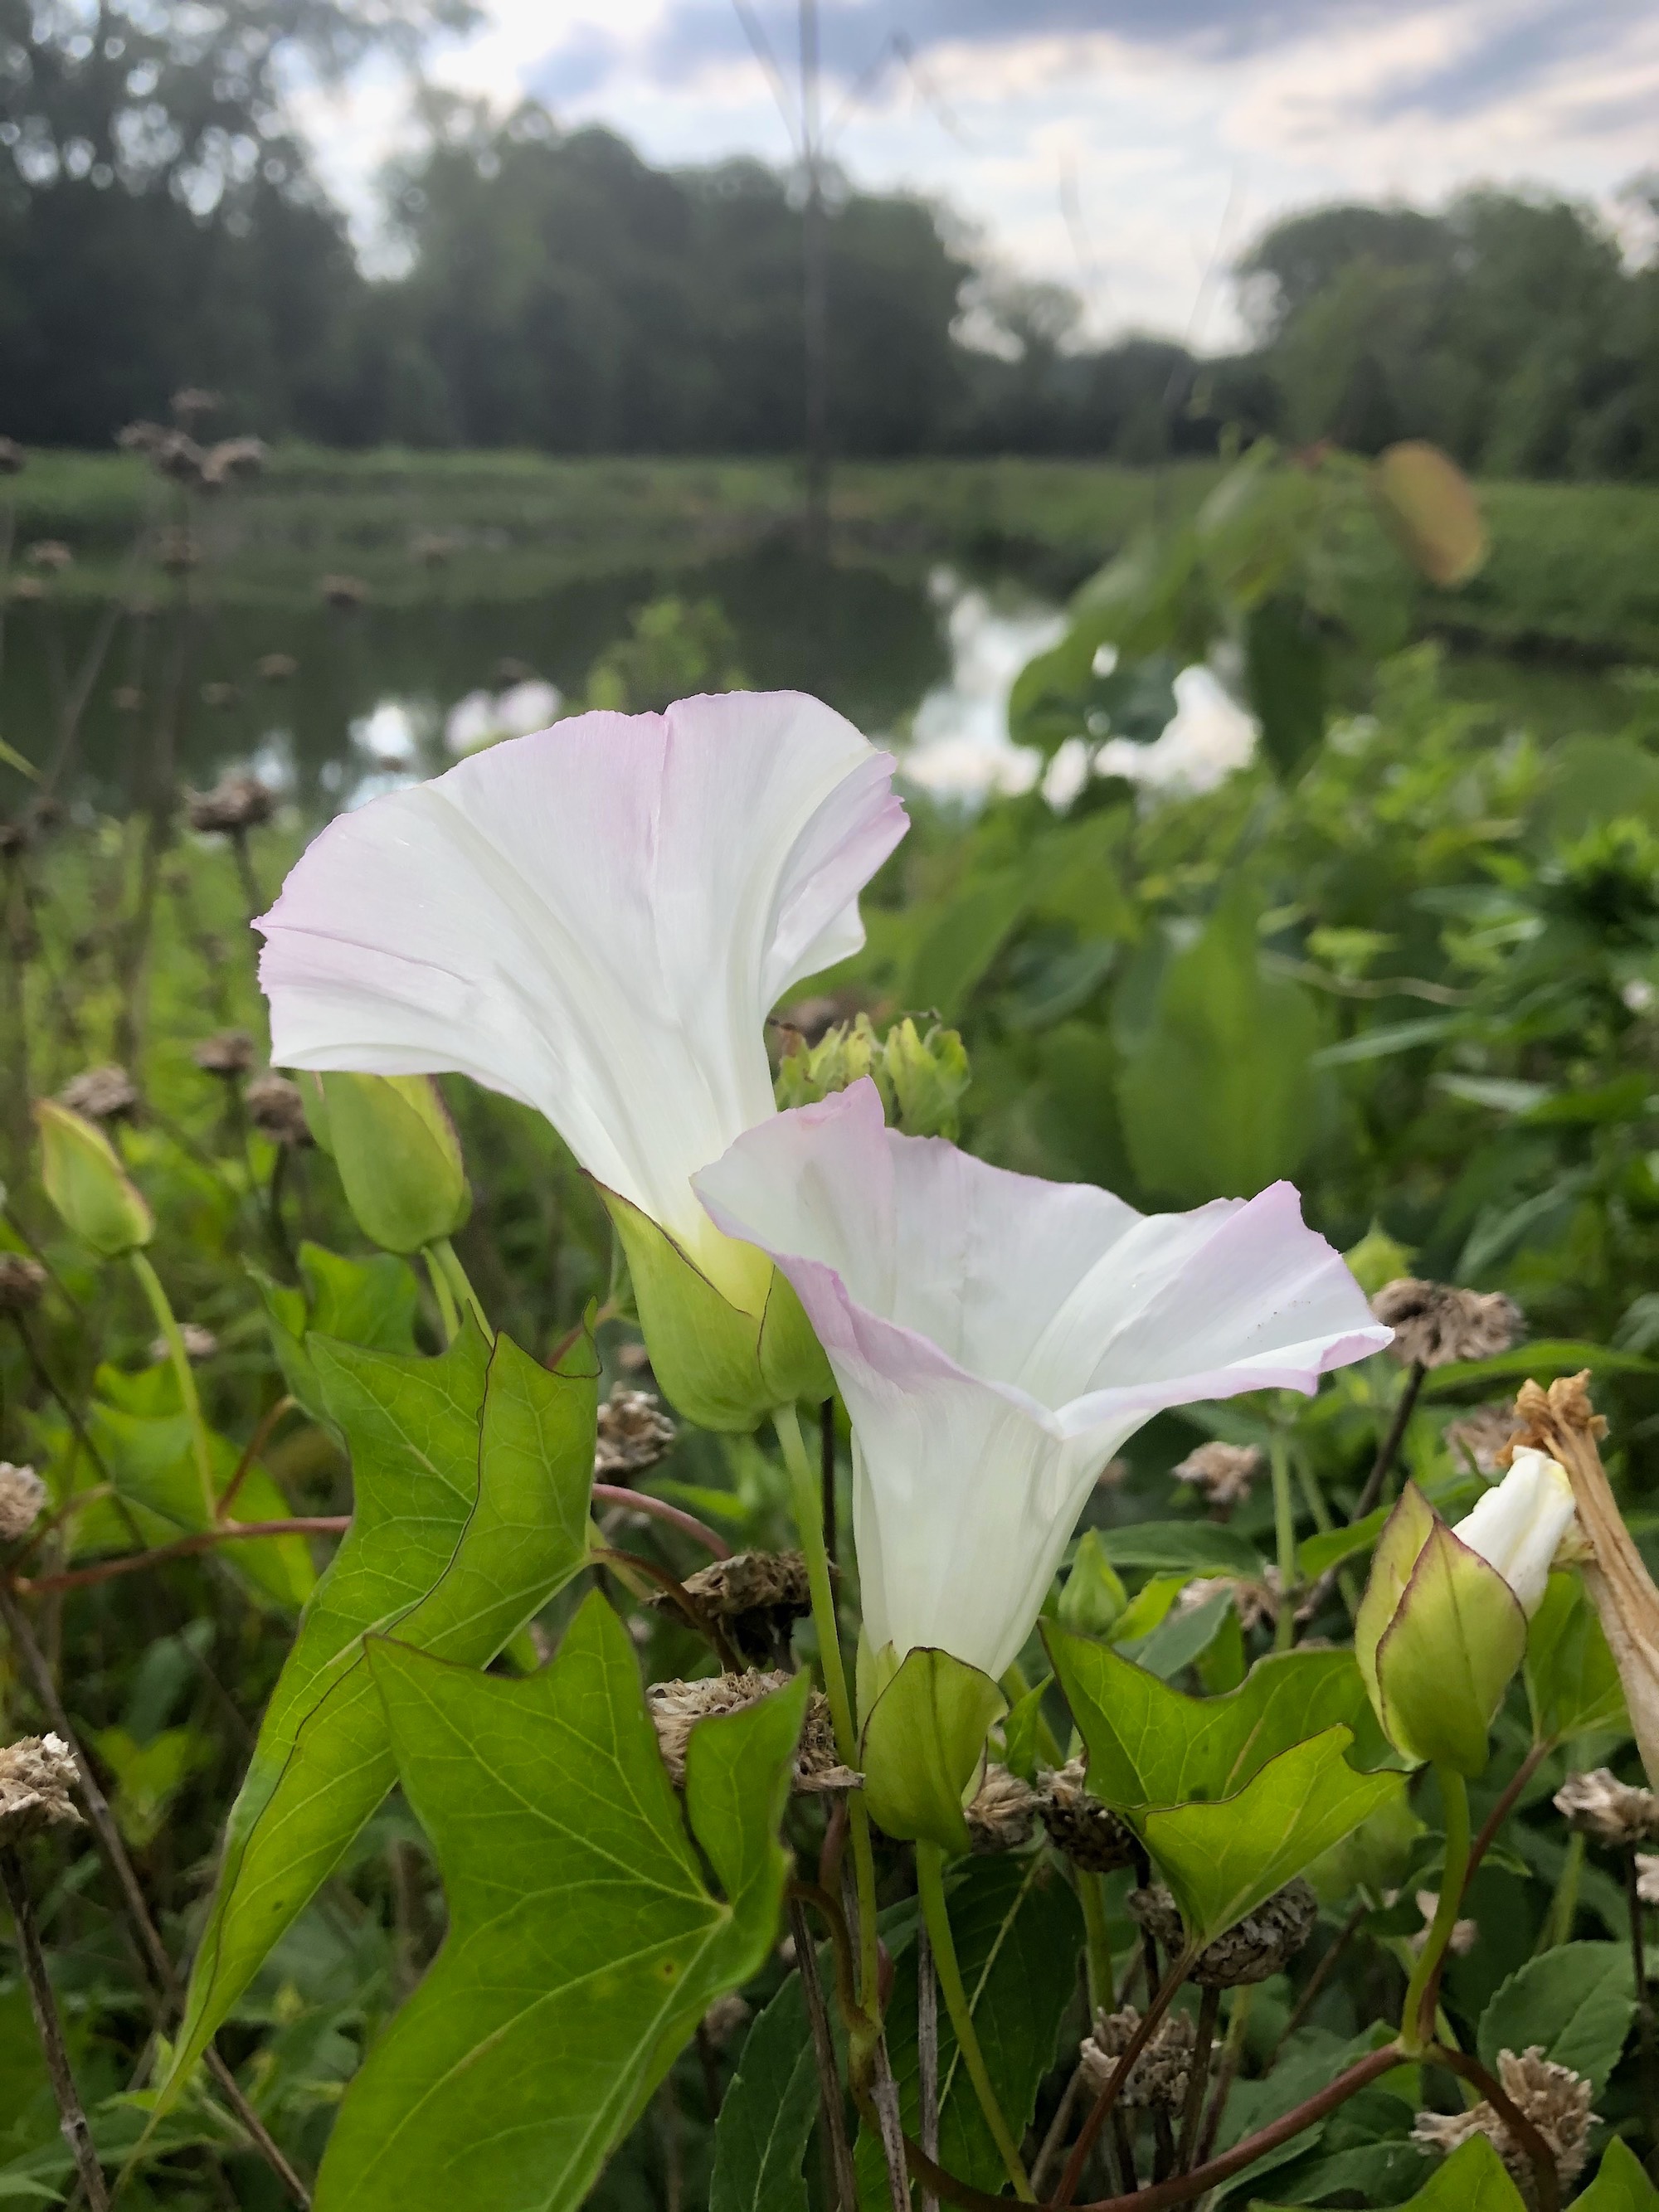 Hedge Bindweed on shore of Marion Dunn Pond in Madison, Wisconsin on July 6, 2020.